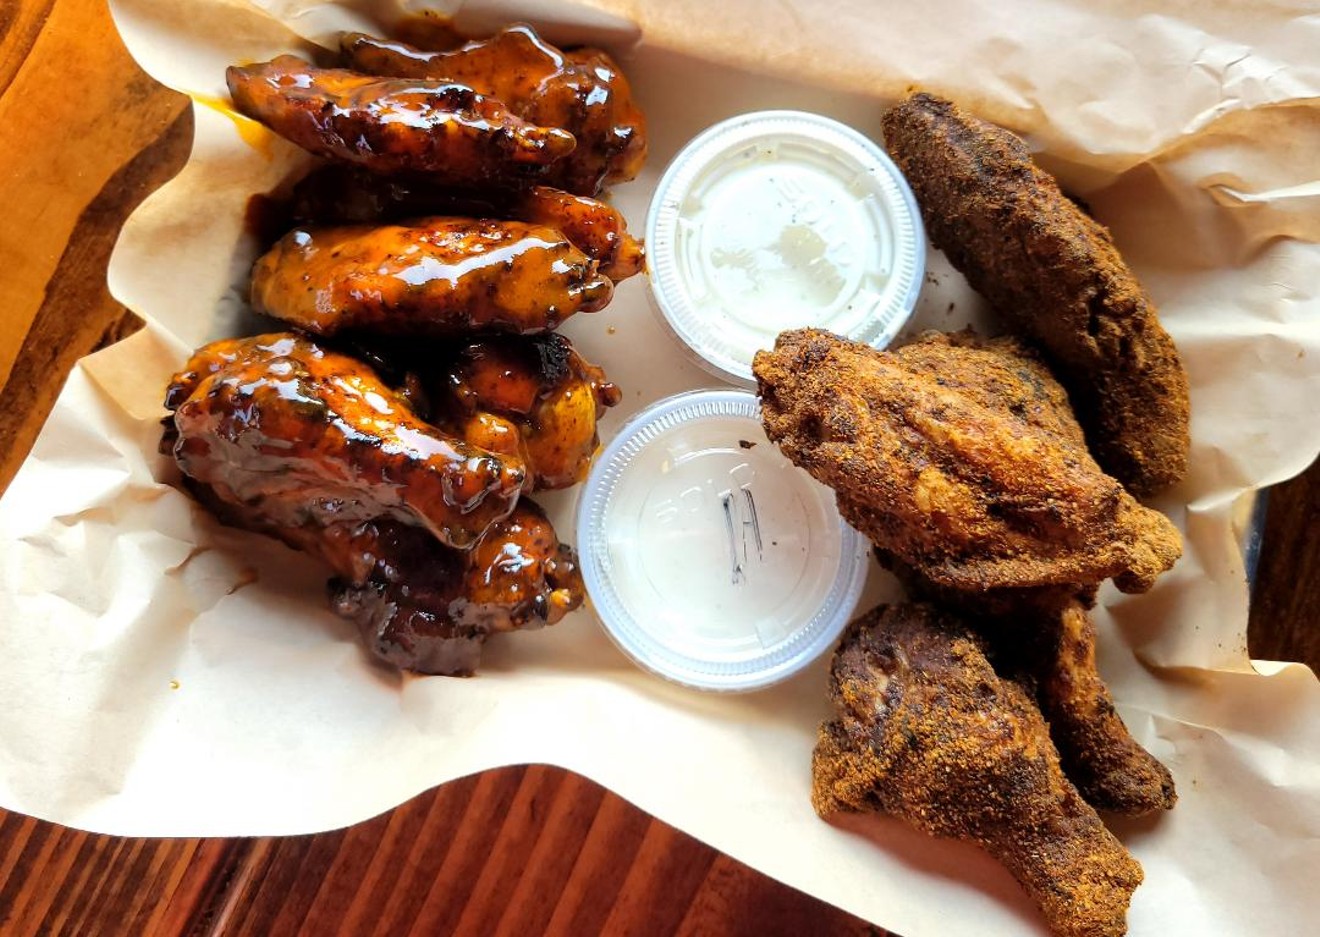 While a kitchen fire forced it to close for over a year, King of Wings has continued to rule since its comeback.